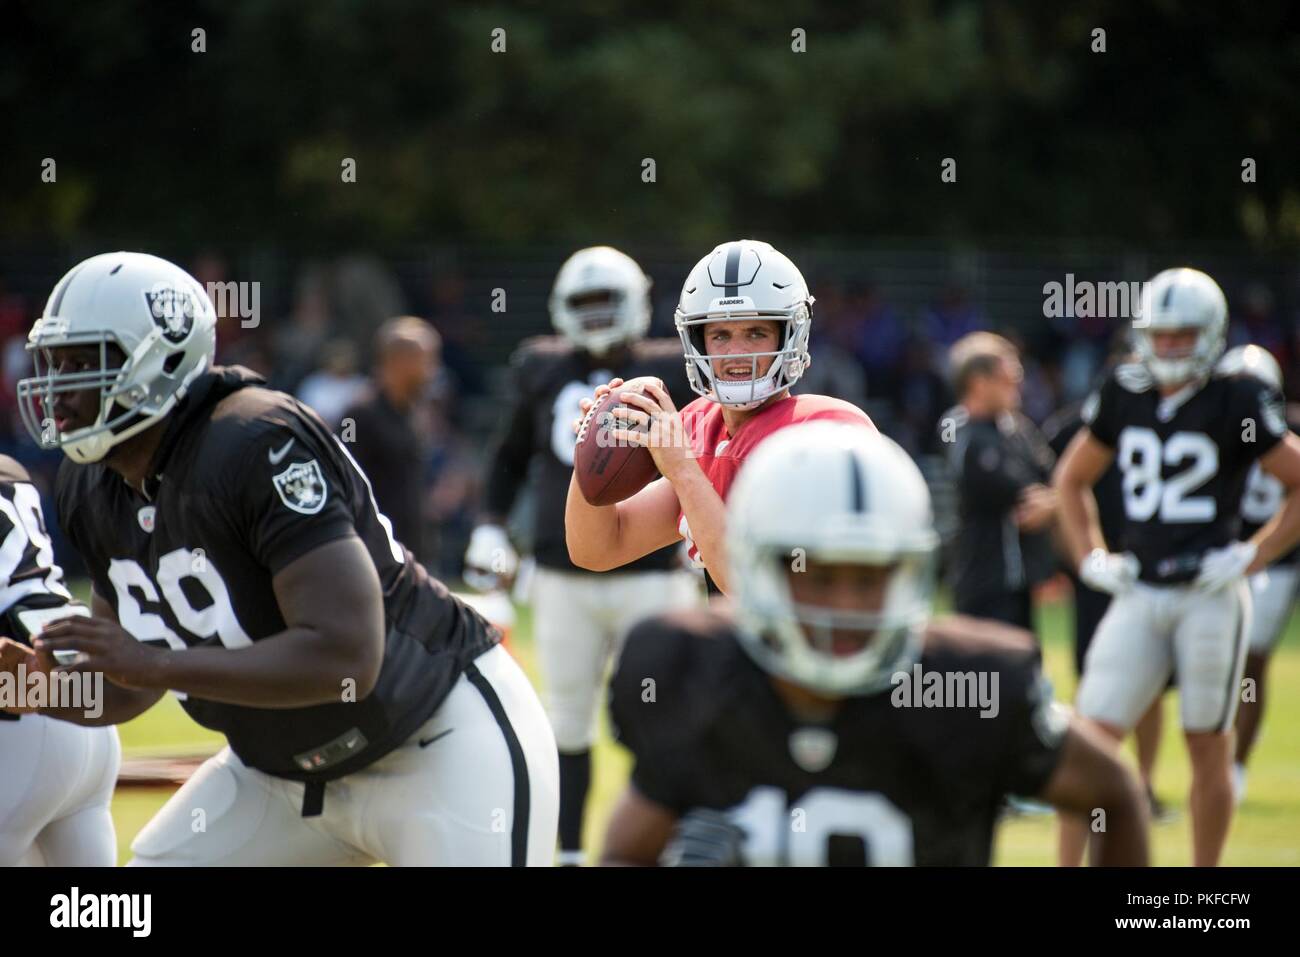 Oakland Raiders Quarterback Derek Carr throws a pass during practice at their training facility in Napa Valley, Calif., August 7, 2018. The Raiders invited Travis Air Force Base Airmen to attend camp and were treated to a scrimmage between the Raiders and Detroit Lions and a meet and greet autograph session with players and coaches from both teams. Stock Photo